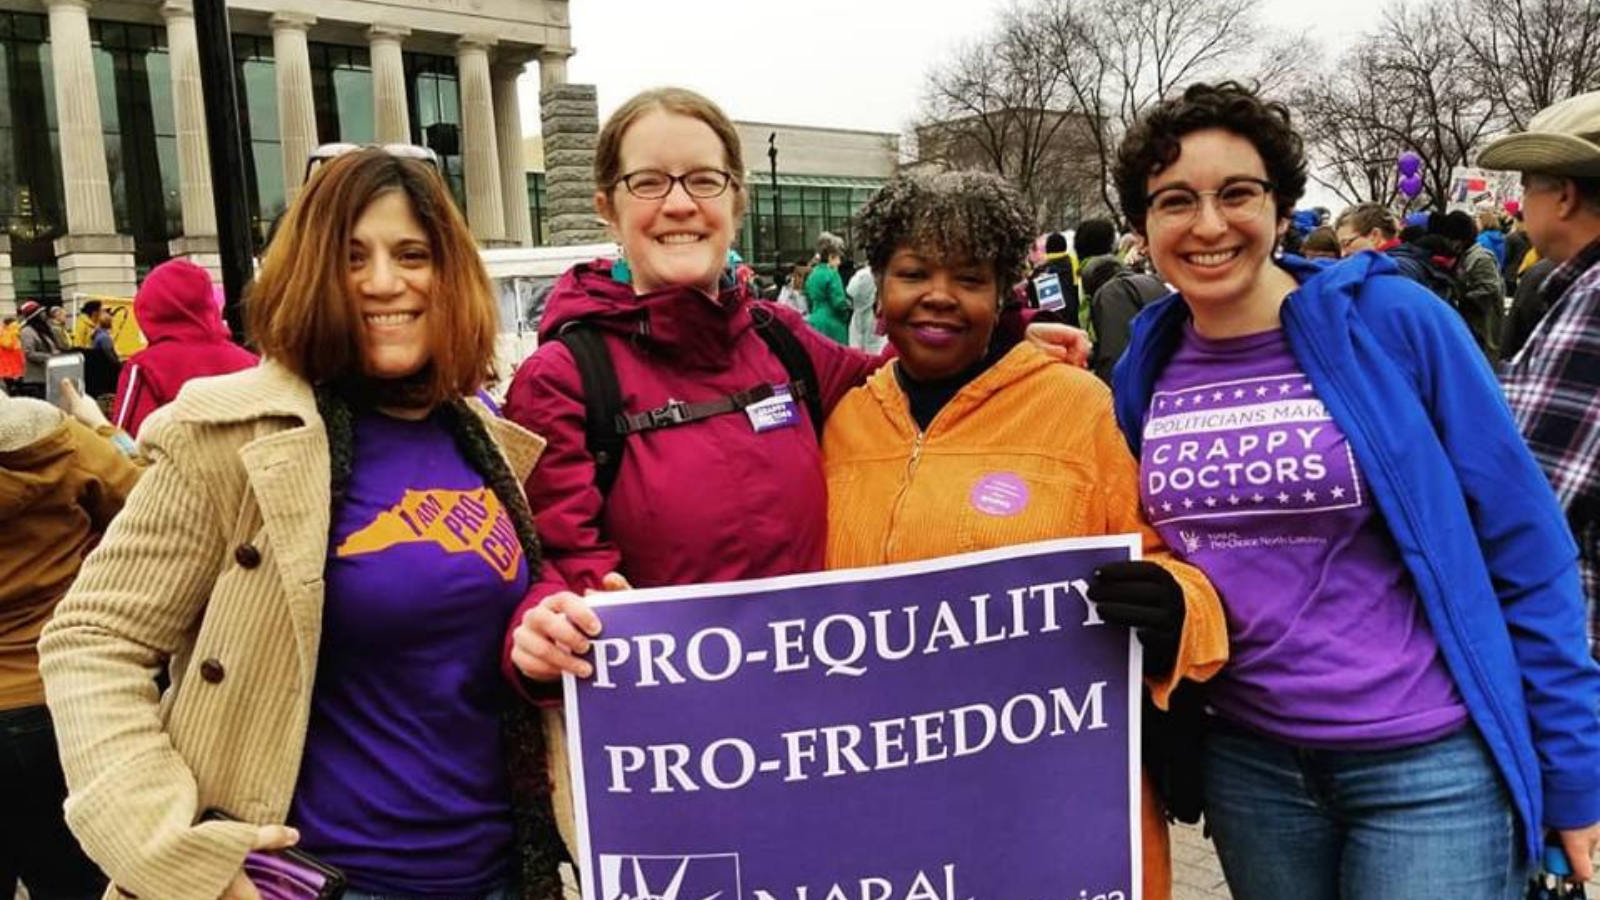 staff and volunteers hold 'pro-equality pro-freedom' sign